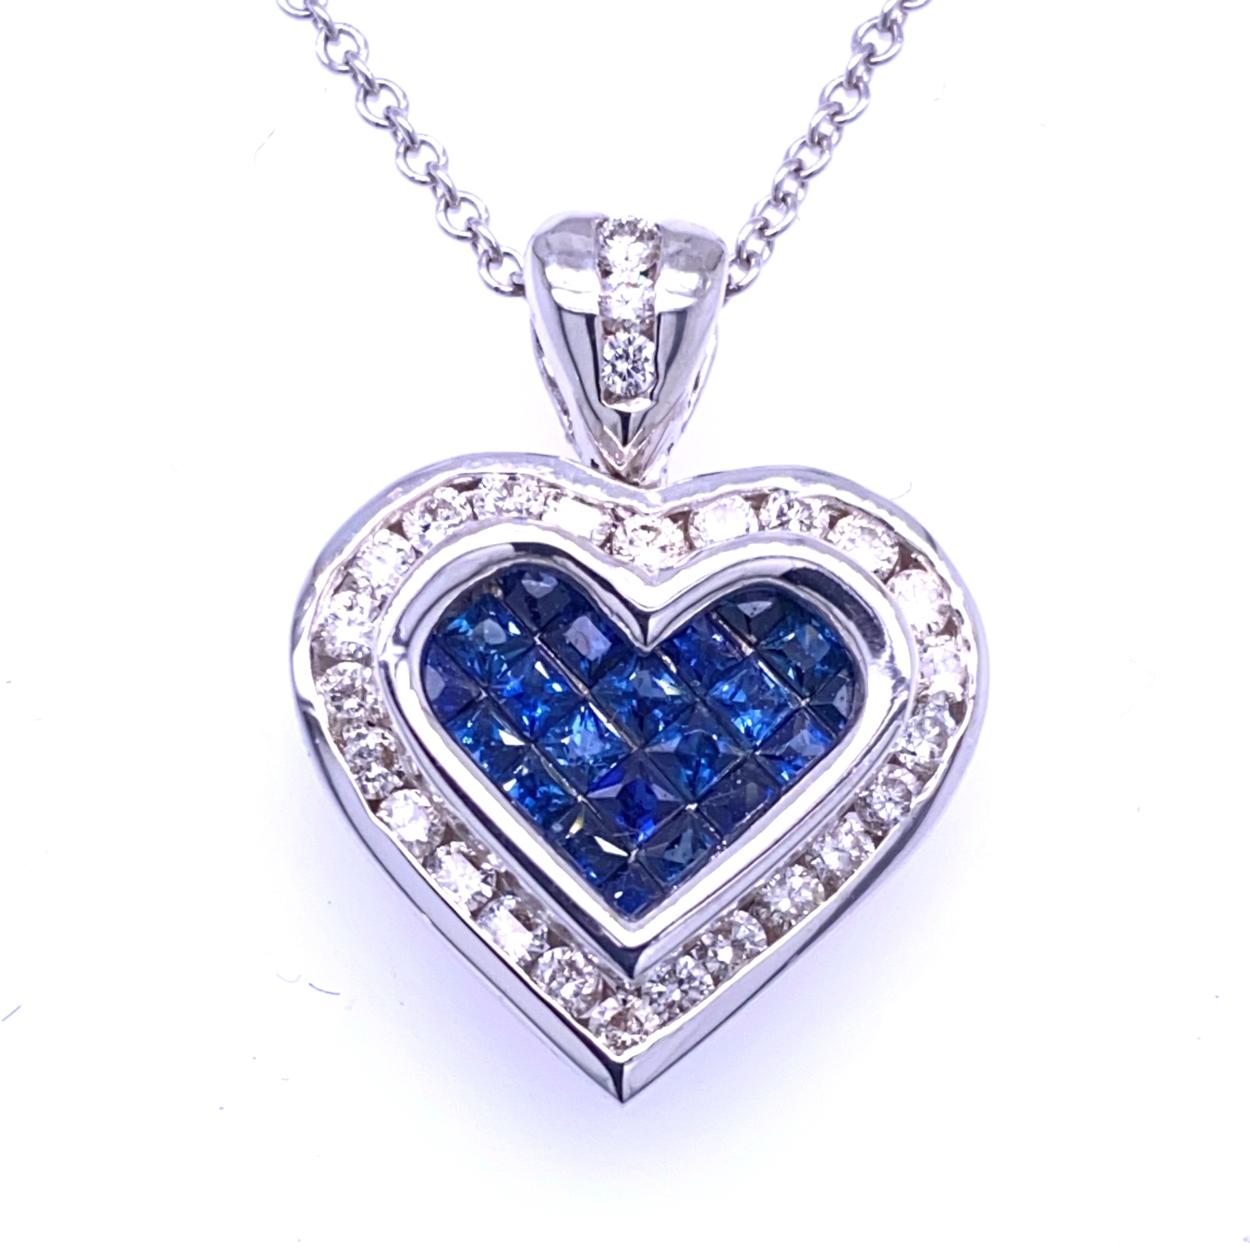 18K Gold Heart shaped Pendant with 21 Invisible Set Princess Cut Blue Sapphires (Total Gem Weight 0.79 Ct) surrounded by a Channel set Halo of diamonds with total weight of 0.49 Ct. 
Total Diamond Weight: 0.49 Ct
Total Gem Weight: 0.79 Ct
Total